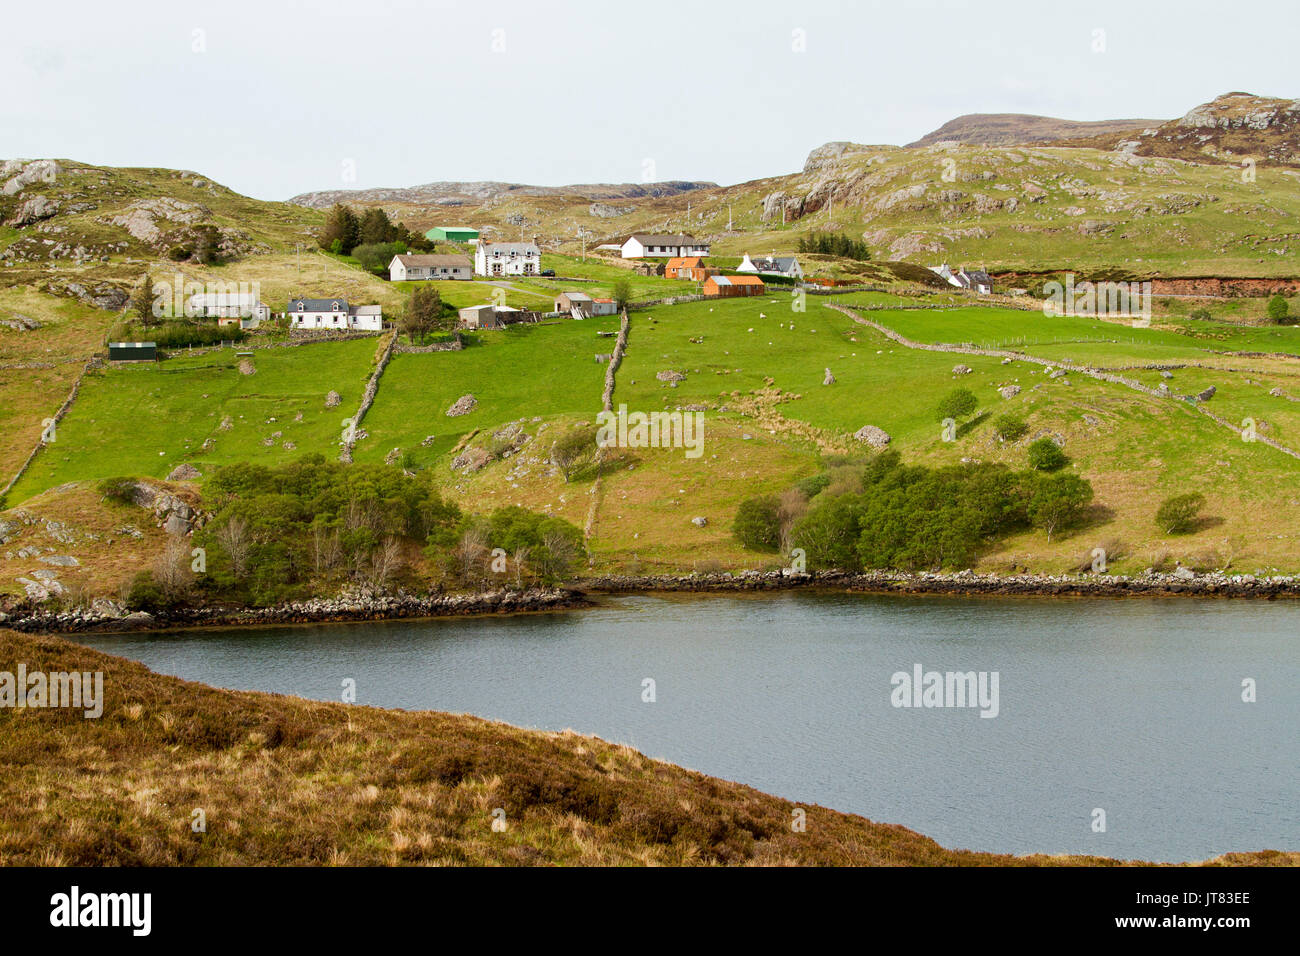 Crofters cottages and farmlands with green fields at base of rocky hills and beside Loch Inchard in Scottish highlands near Kinlochbervie, Scotland Stock Photo